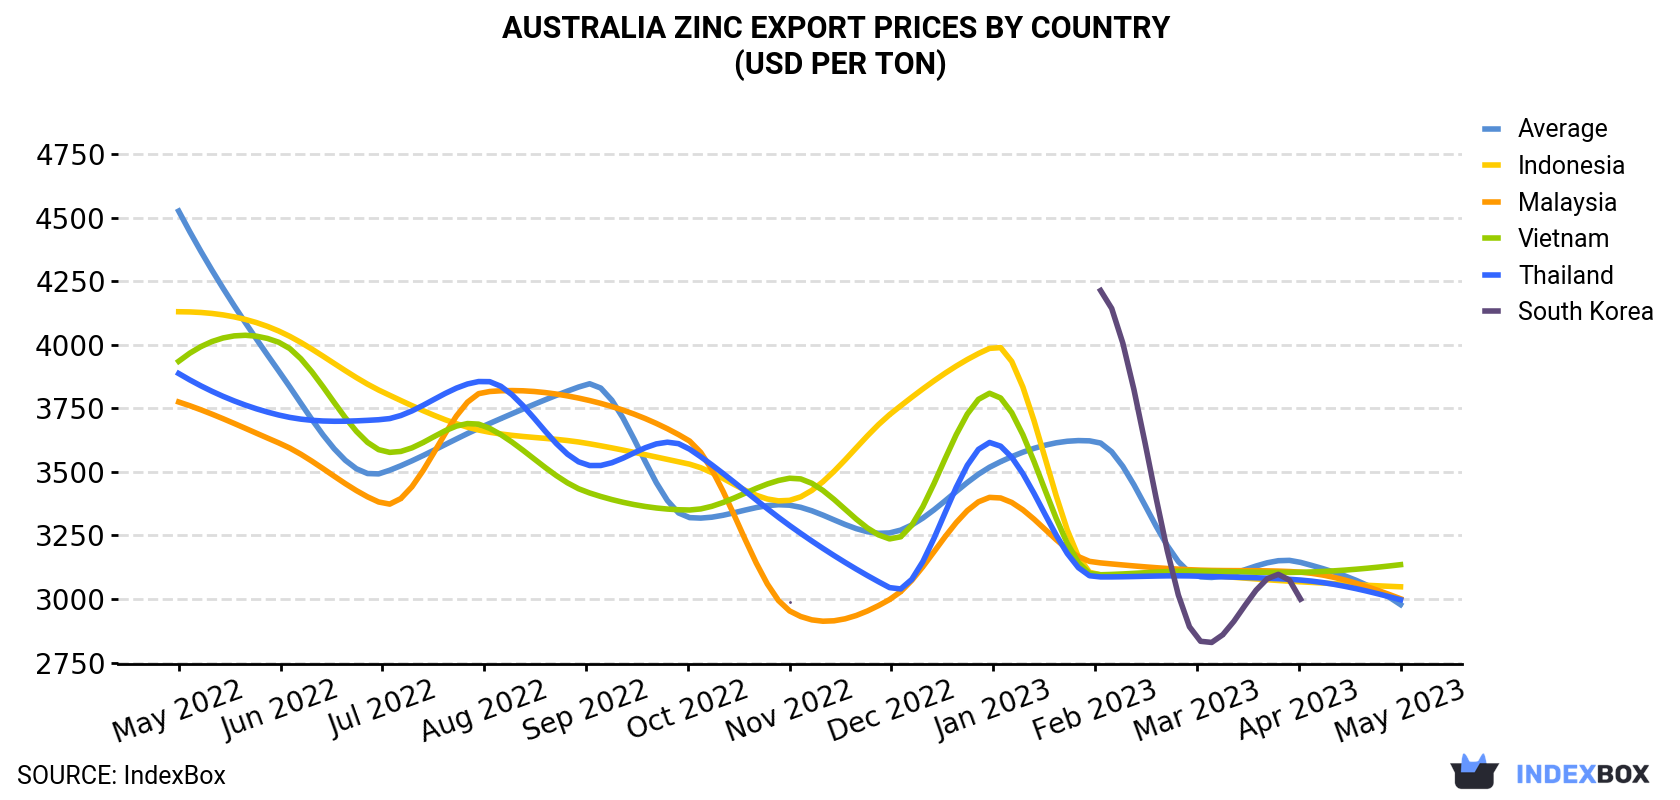 Australia Zinc Export Prices By Country (USD Per Ton)